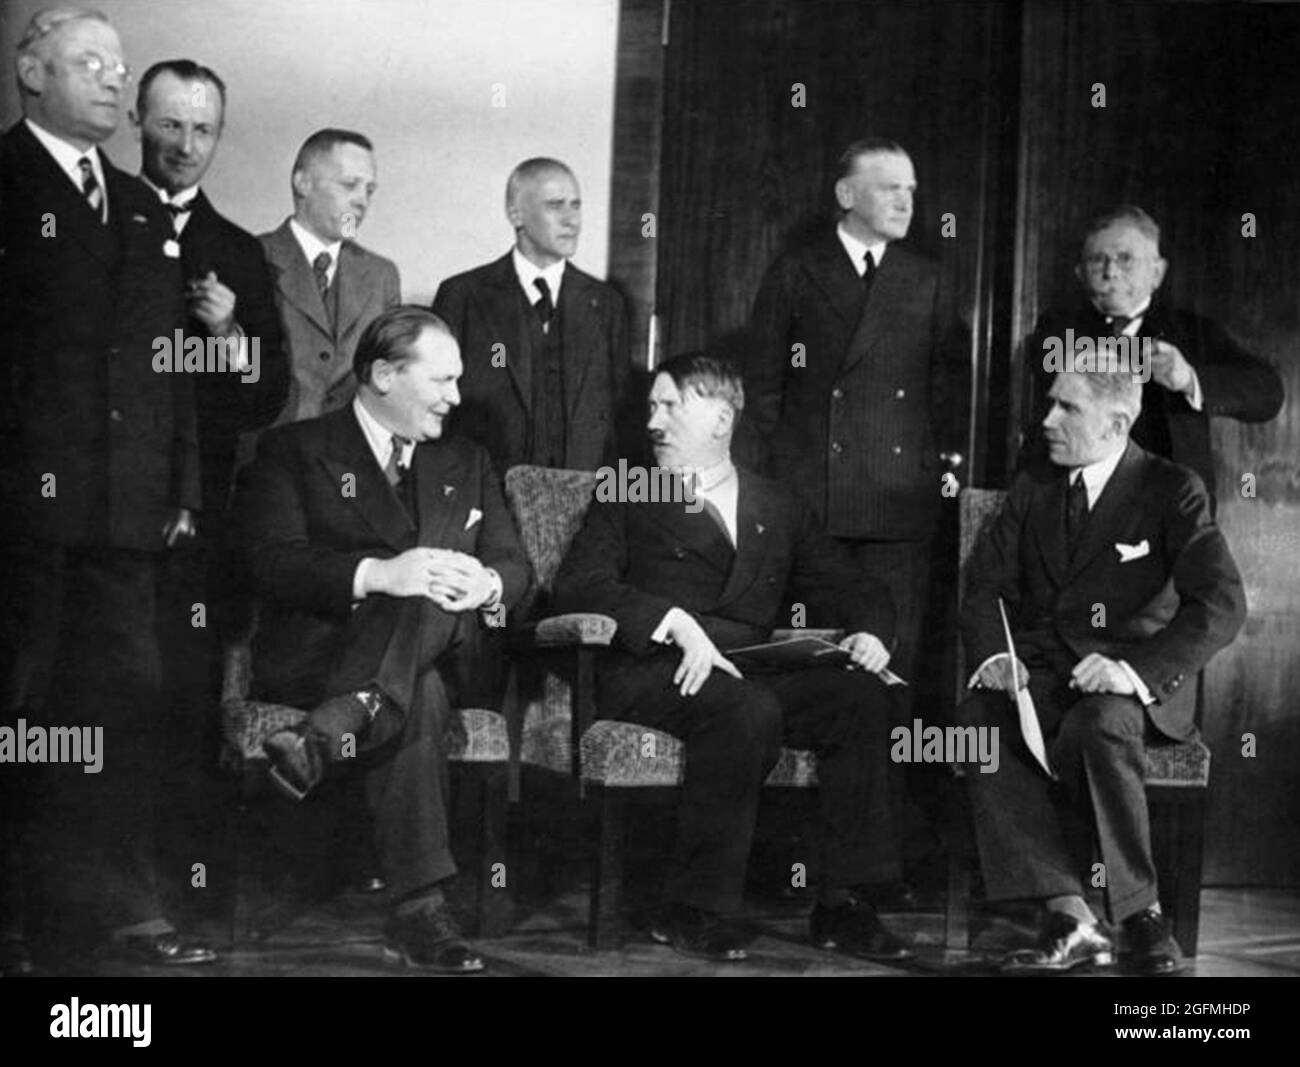 The first cabinet under Adolf Hitler after being given power on 30 January 1933. Sitting (L-R): Hermann Göring, Reich Commissioner for Aviation and the Prussian Ministry of the Interior, Adolf Hitler, Reich Chancellor, Franz von Papen, Vice Chancellor Standing (L-R) : Franz Seldte, Minister of Labour, Dr. Dr. Günther Gereke, Lutz Graf Schwerin von Krosigk, Reich Minister of Finance, Wilhelm Frick, Reich Minister of the Interior, Werner von Blomberg, Reich Minister of Armed Forces, Alfred Hugenberg, Minister of Economy and Food. Credit: German Bundesarchiv Stock Photo